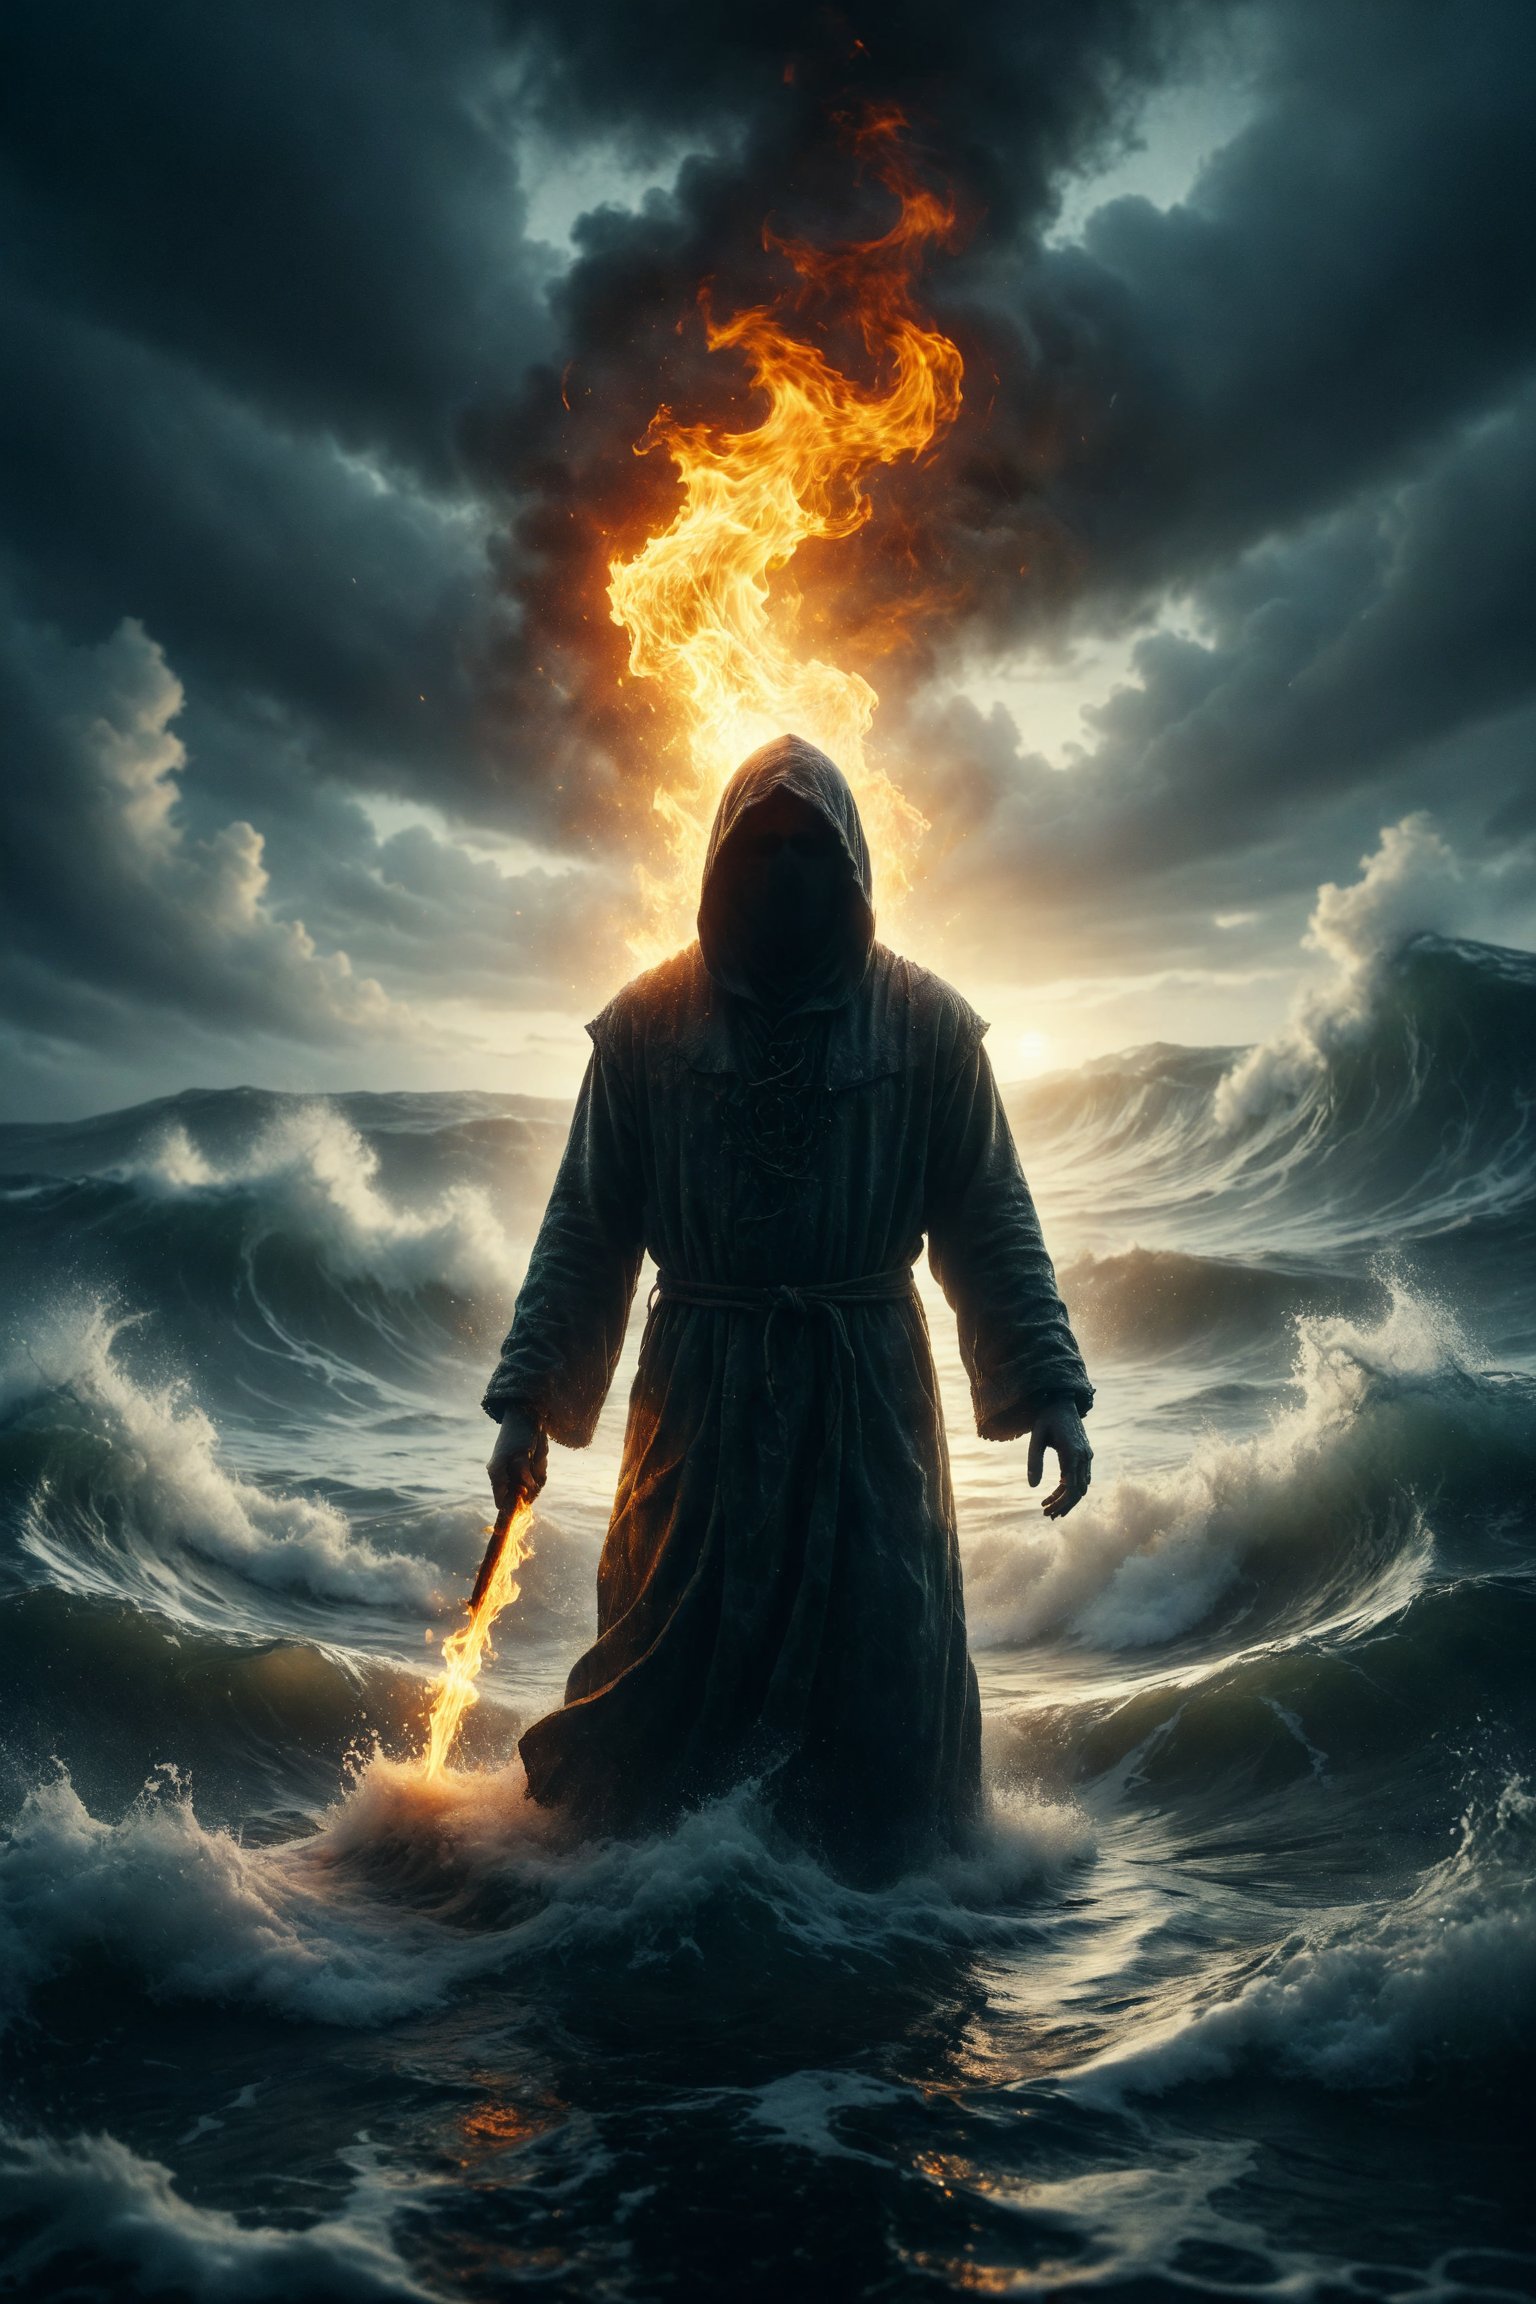 A hooded figure emerges from the depths of the ocean, holding a burning torch aloft while waves spiral around them, representing rebirth and spiritual enlightenment.